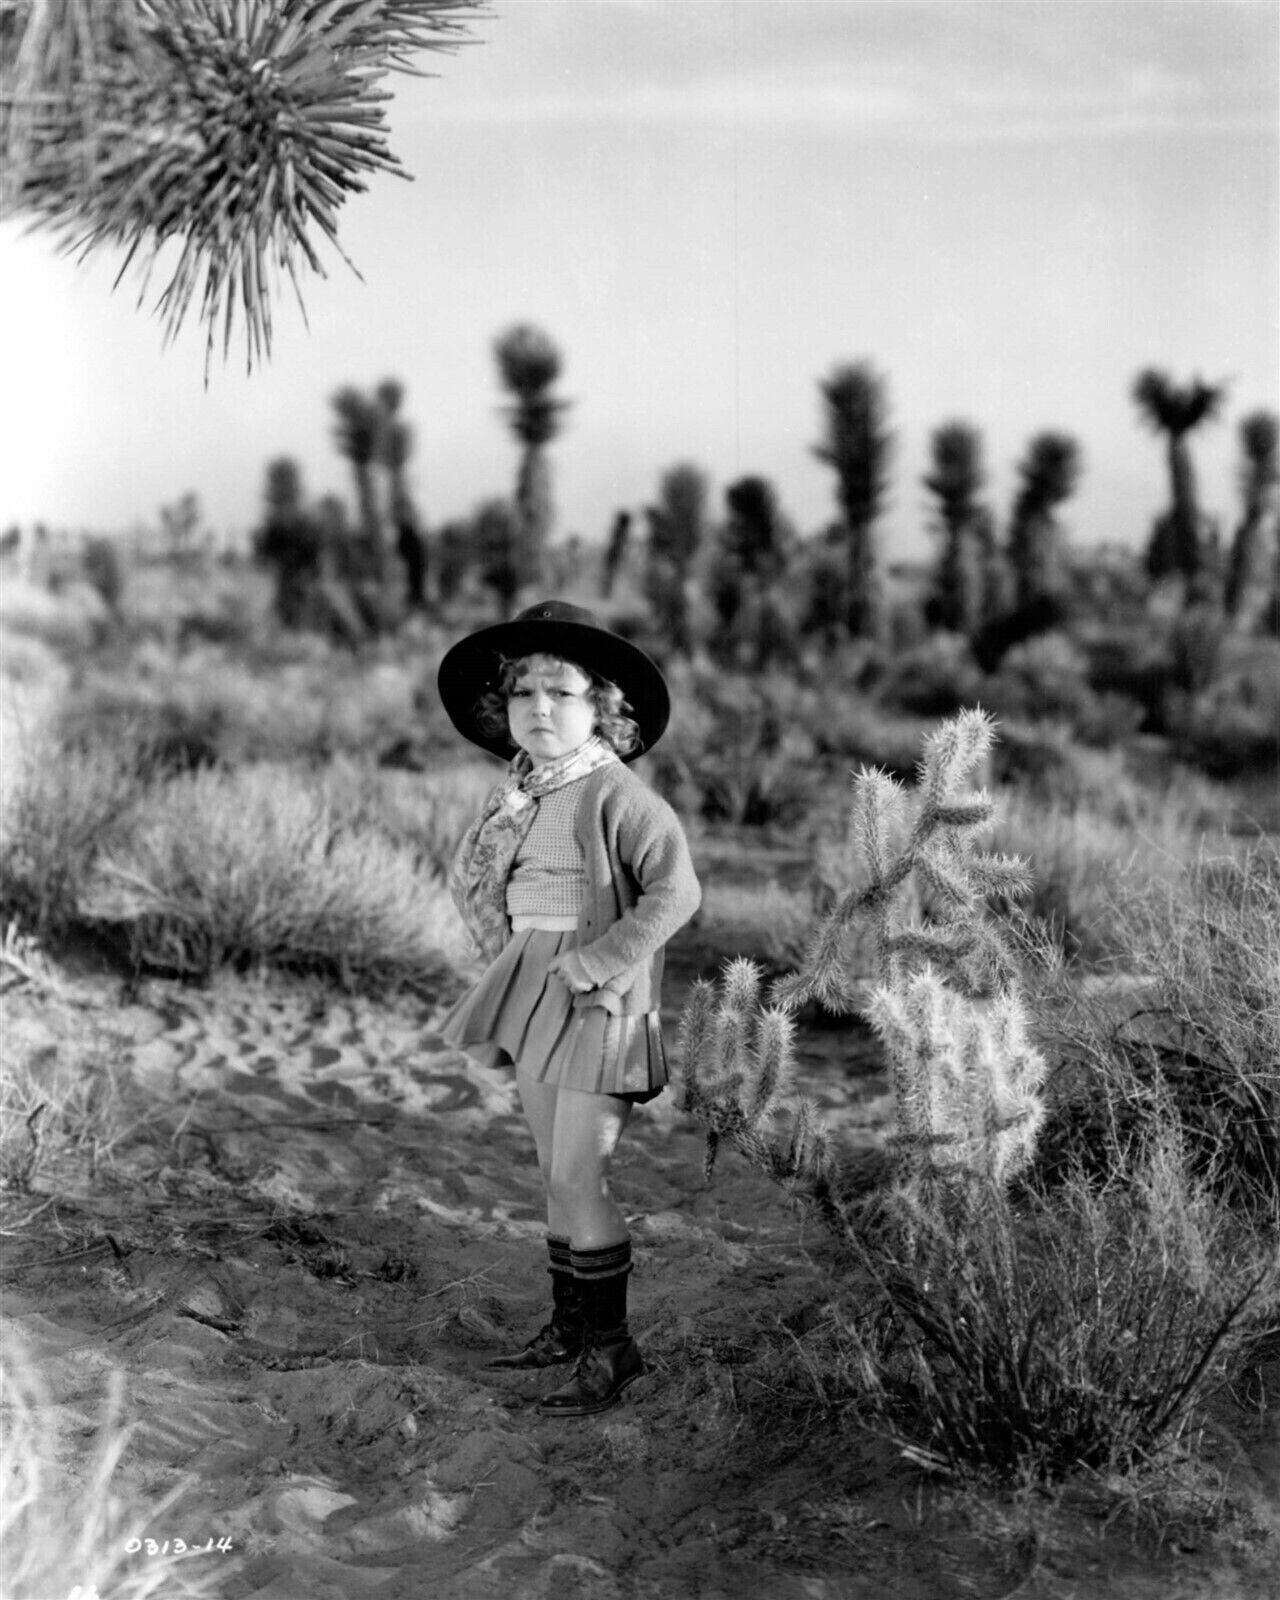 Shirley Temple looks cute in western hat in desert landscape 8x10 real photo